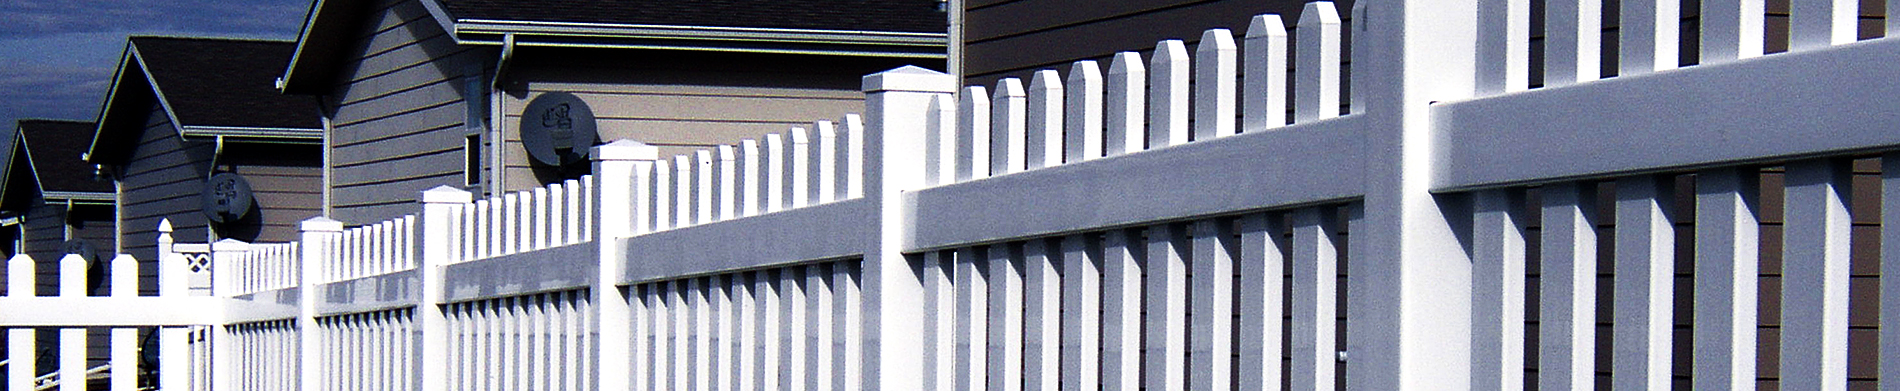 Benefits of Installing a Semi Privacy Vinyl Fence on Your Property